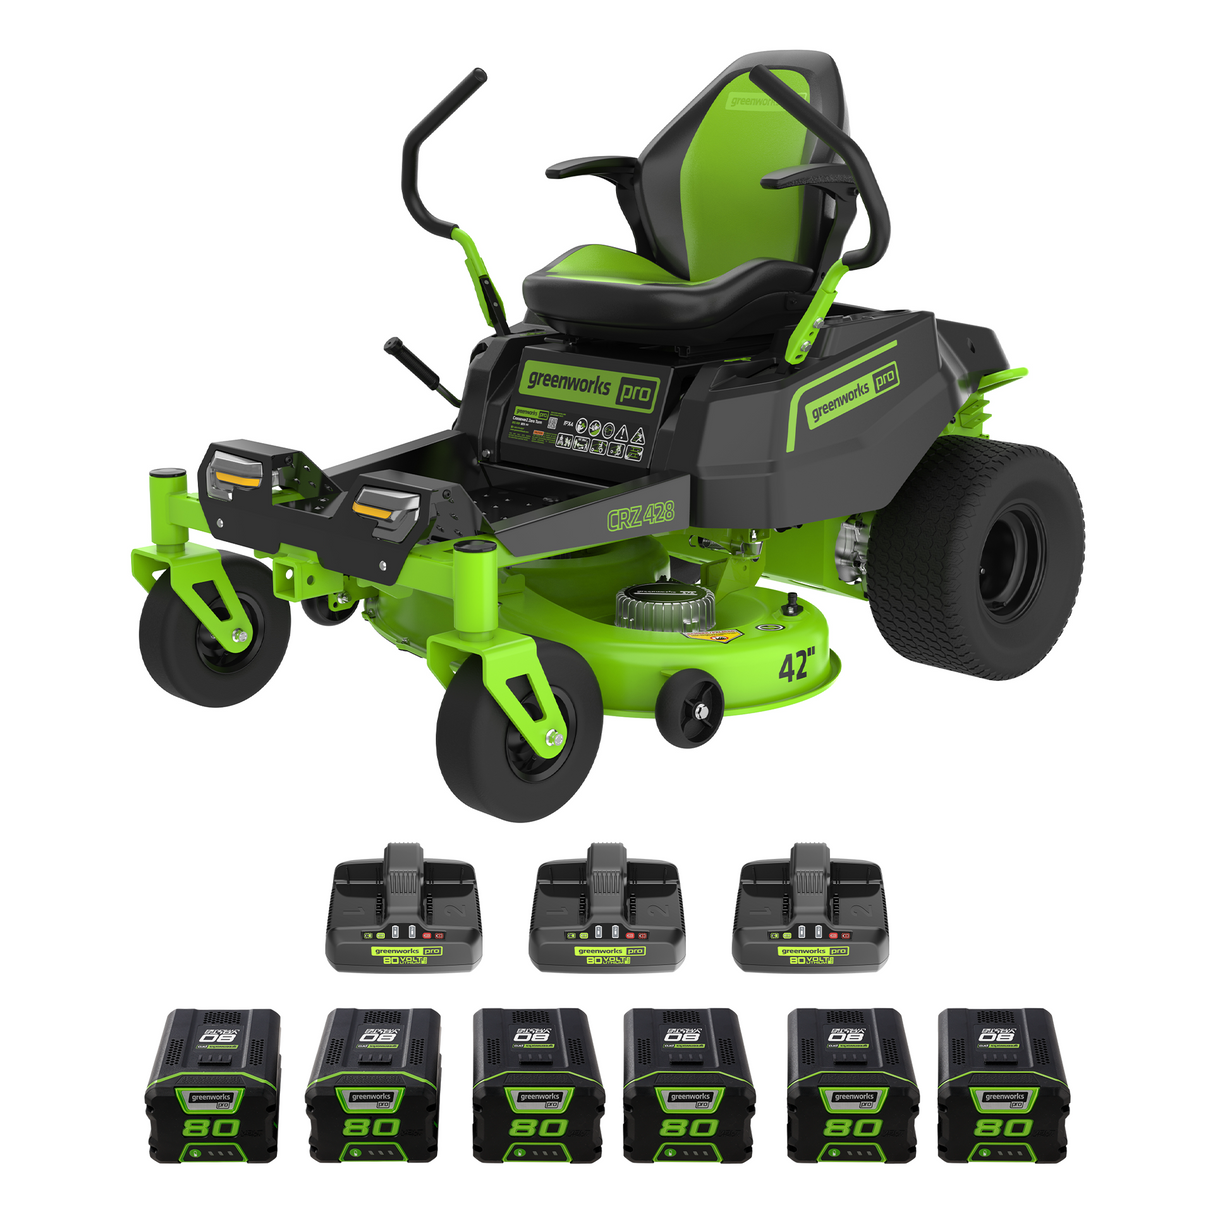 80V 42" Crossover Z Residential Zero Turn Mower, (6) 5.0Ah Batteries and (3) Dual Port Chargers